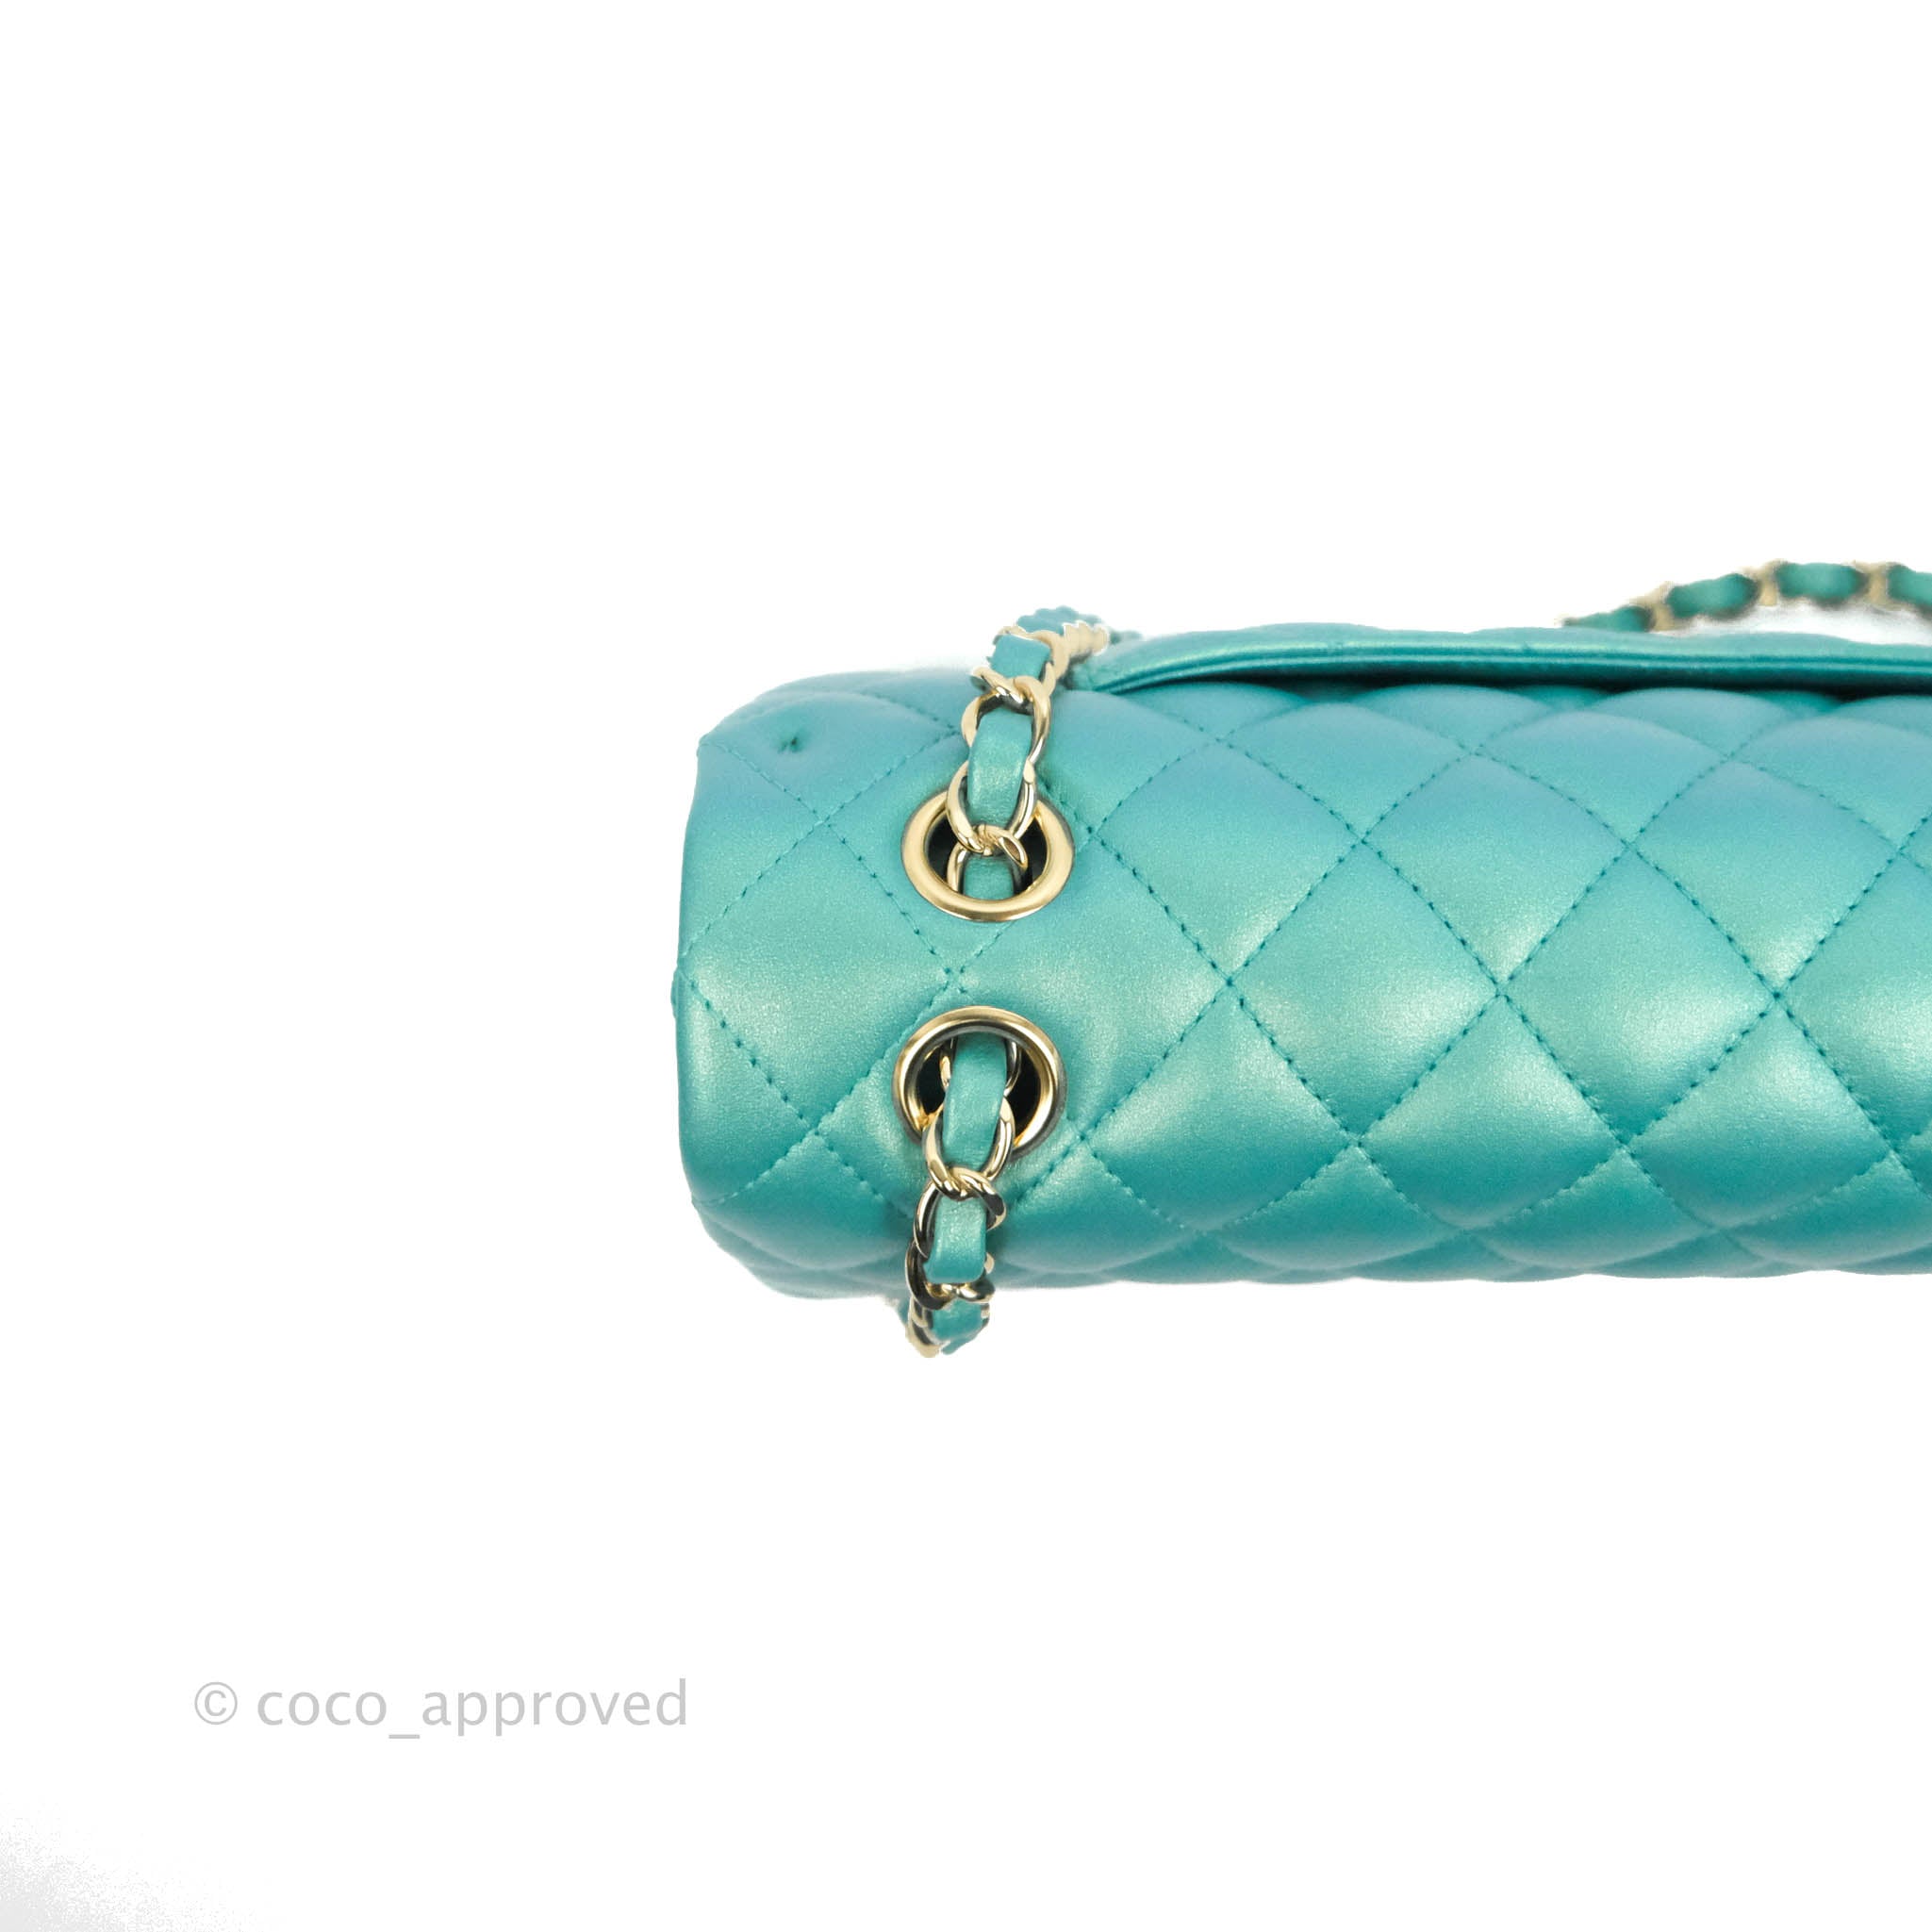 Chanel timeless double flap bag in turquoise Lambskin with gold